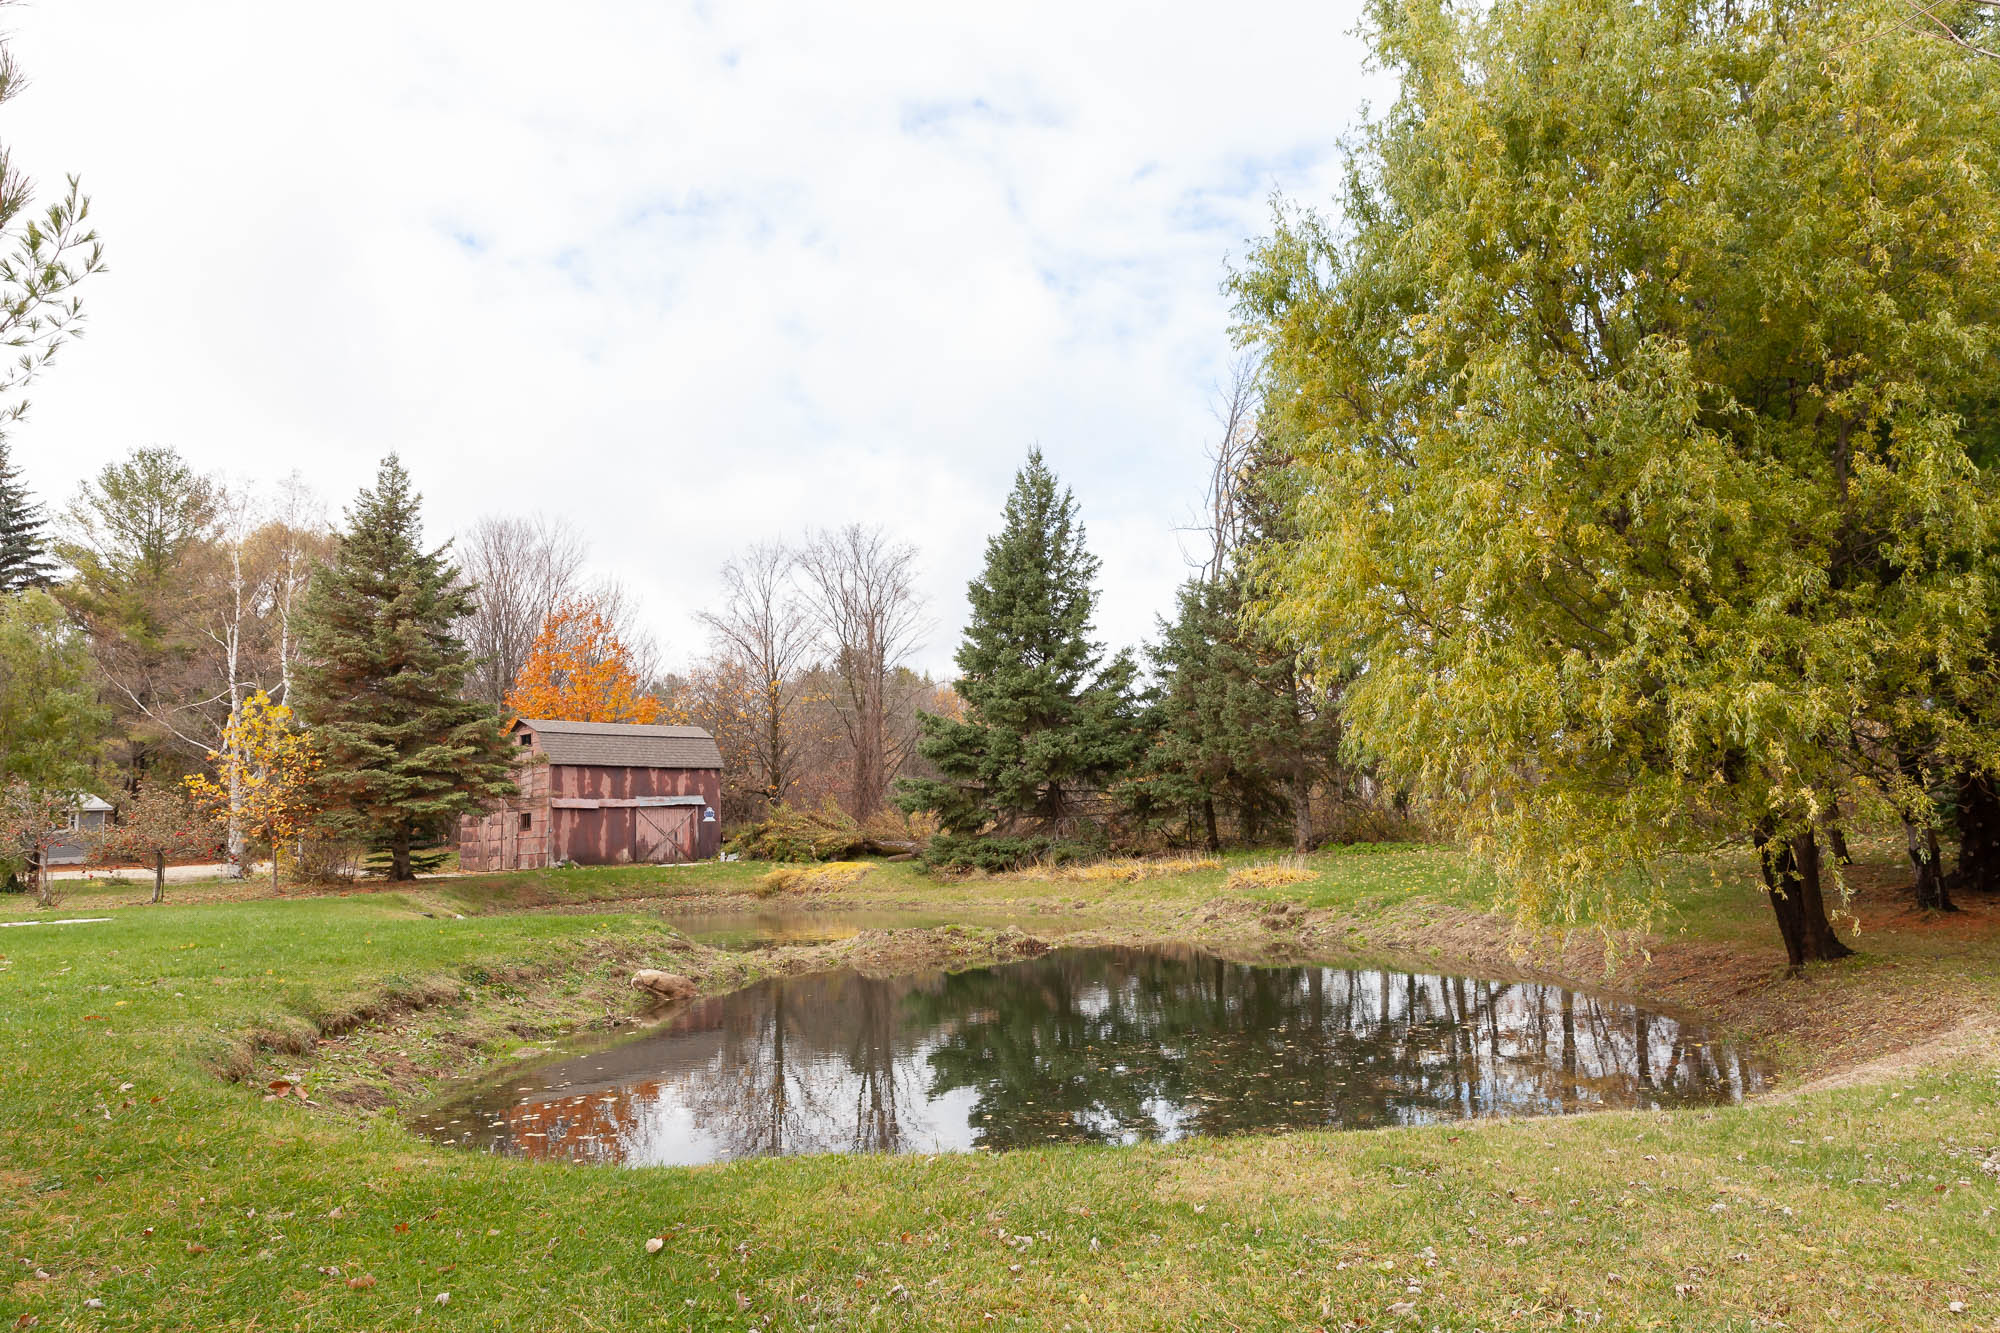 pond on property in Collingwood, Ontario